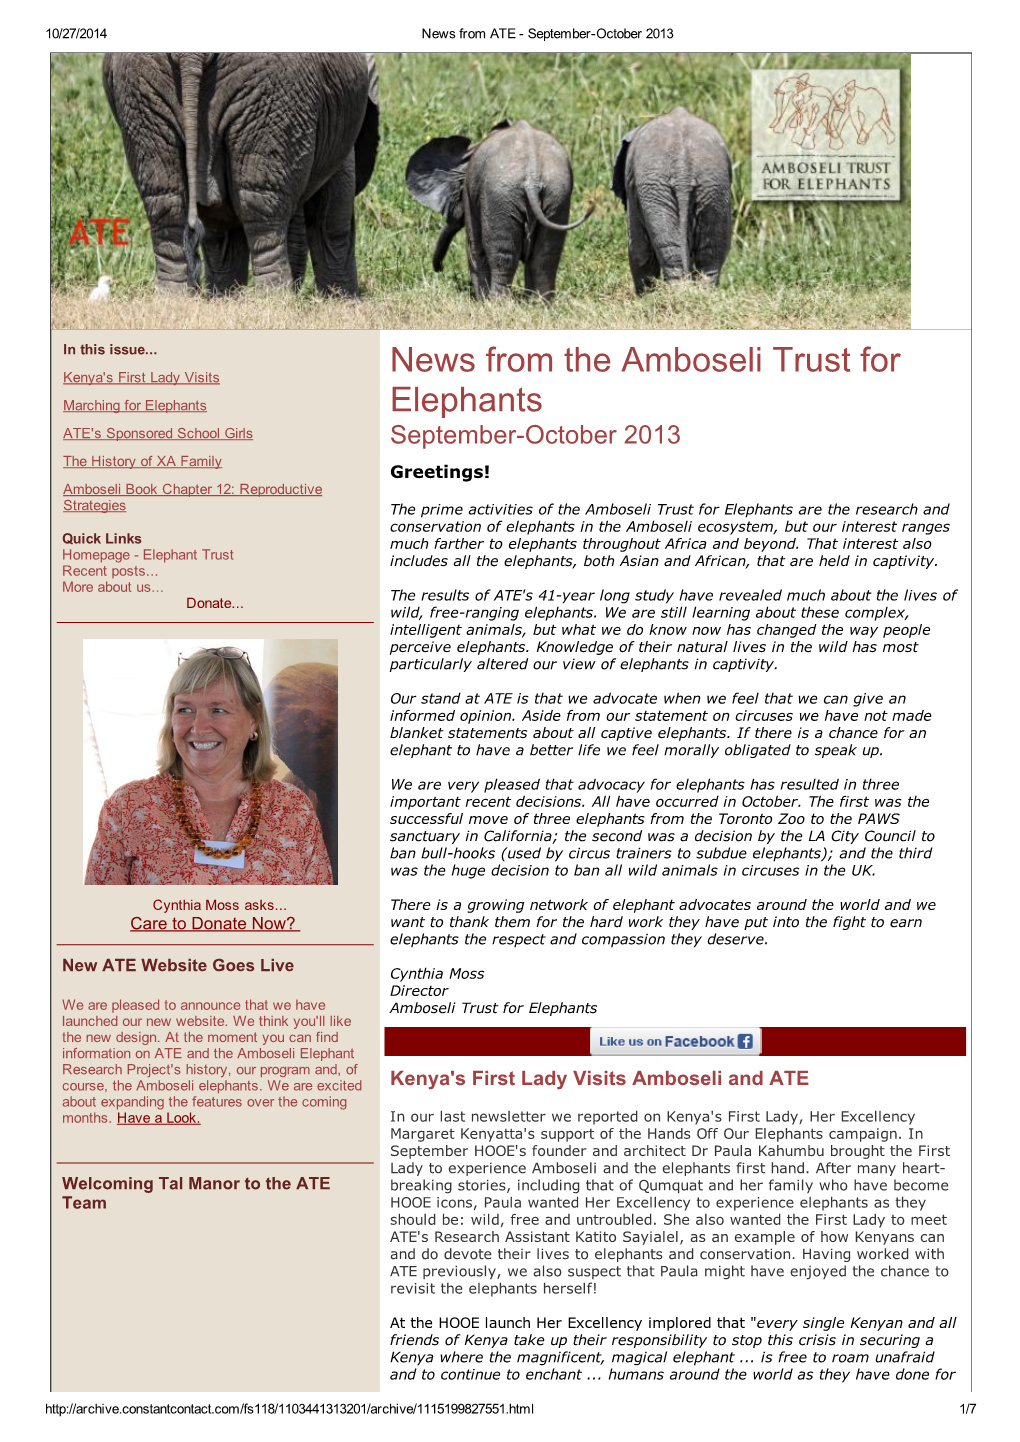 News from the Amboseli Trust for Elephants